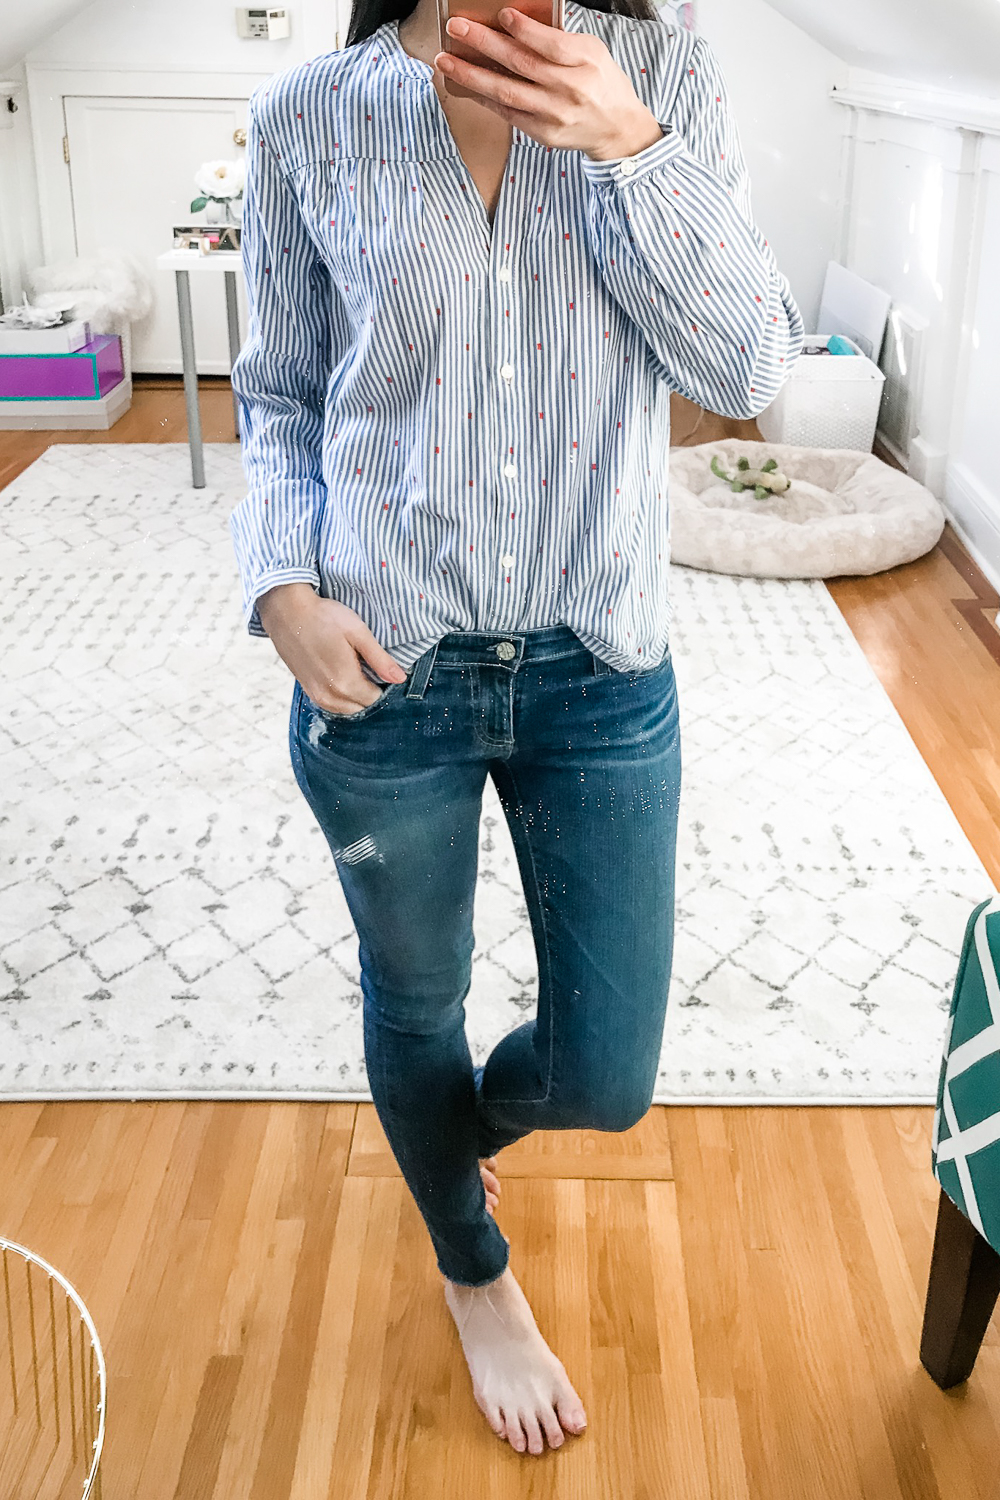 Old Navy Printed Button-Front Shirt, Old Navy Try-On Haul: Best of Spring 2019 by Stephanie Ziajka from the popular affordable fashion blog Diary of a Debutante, Old Navy Spring 2019 Try-On Haul, Spring Try-On Haul